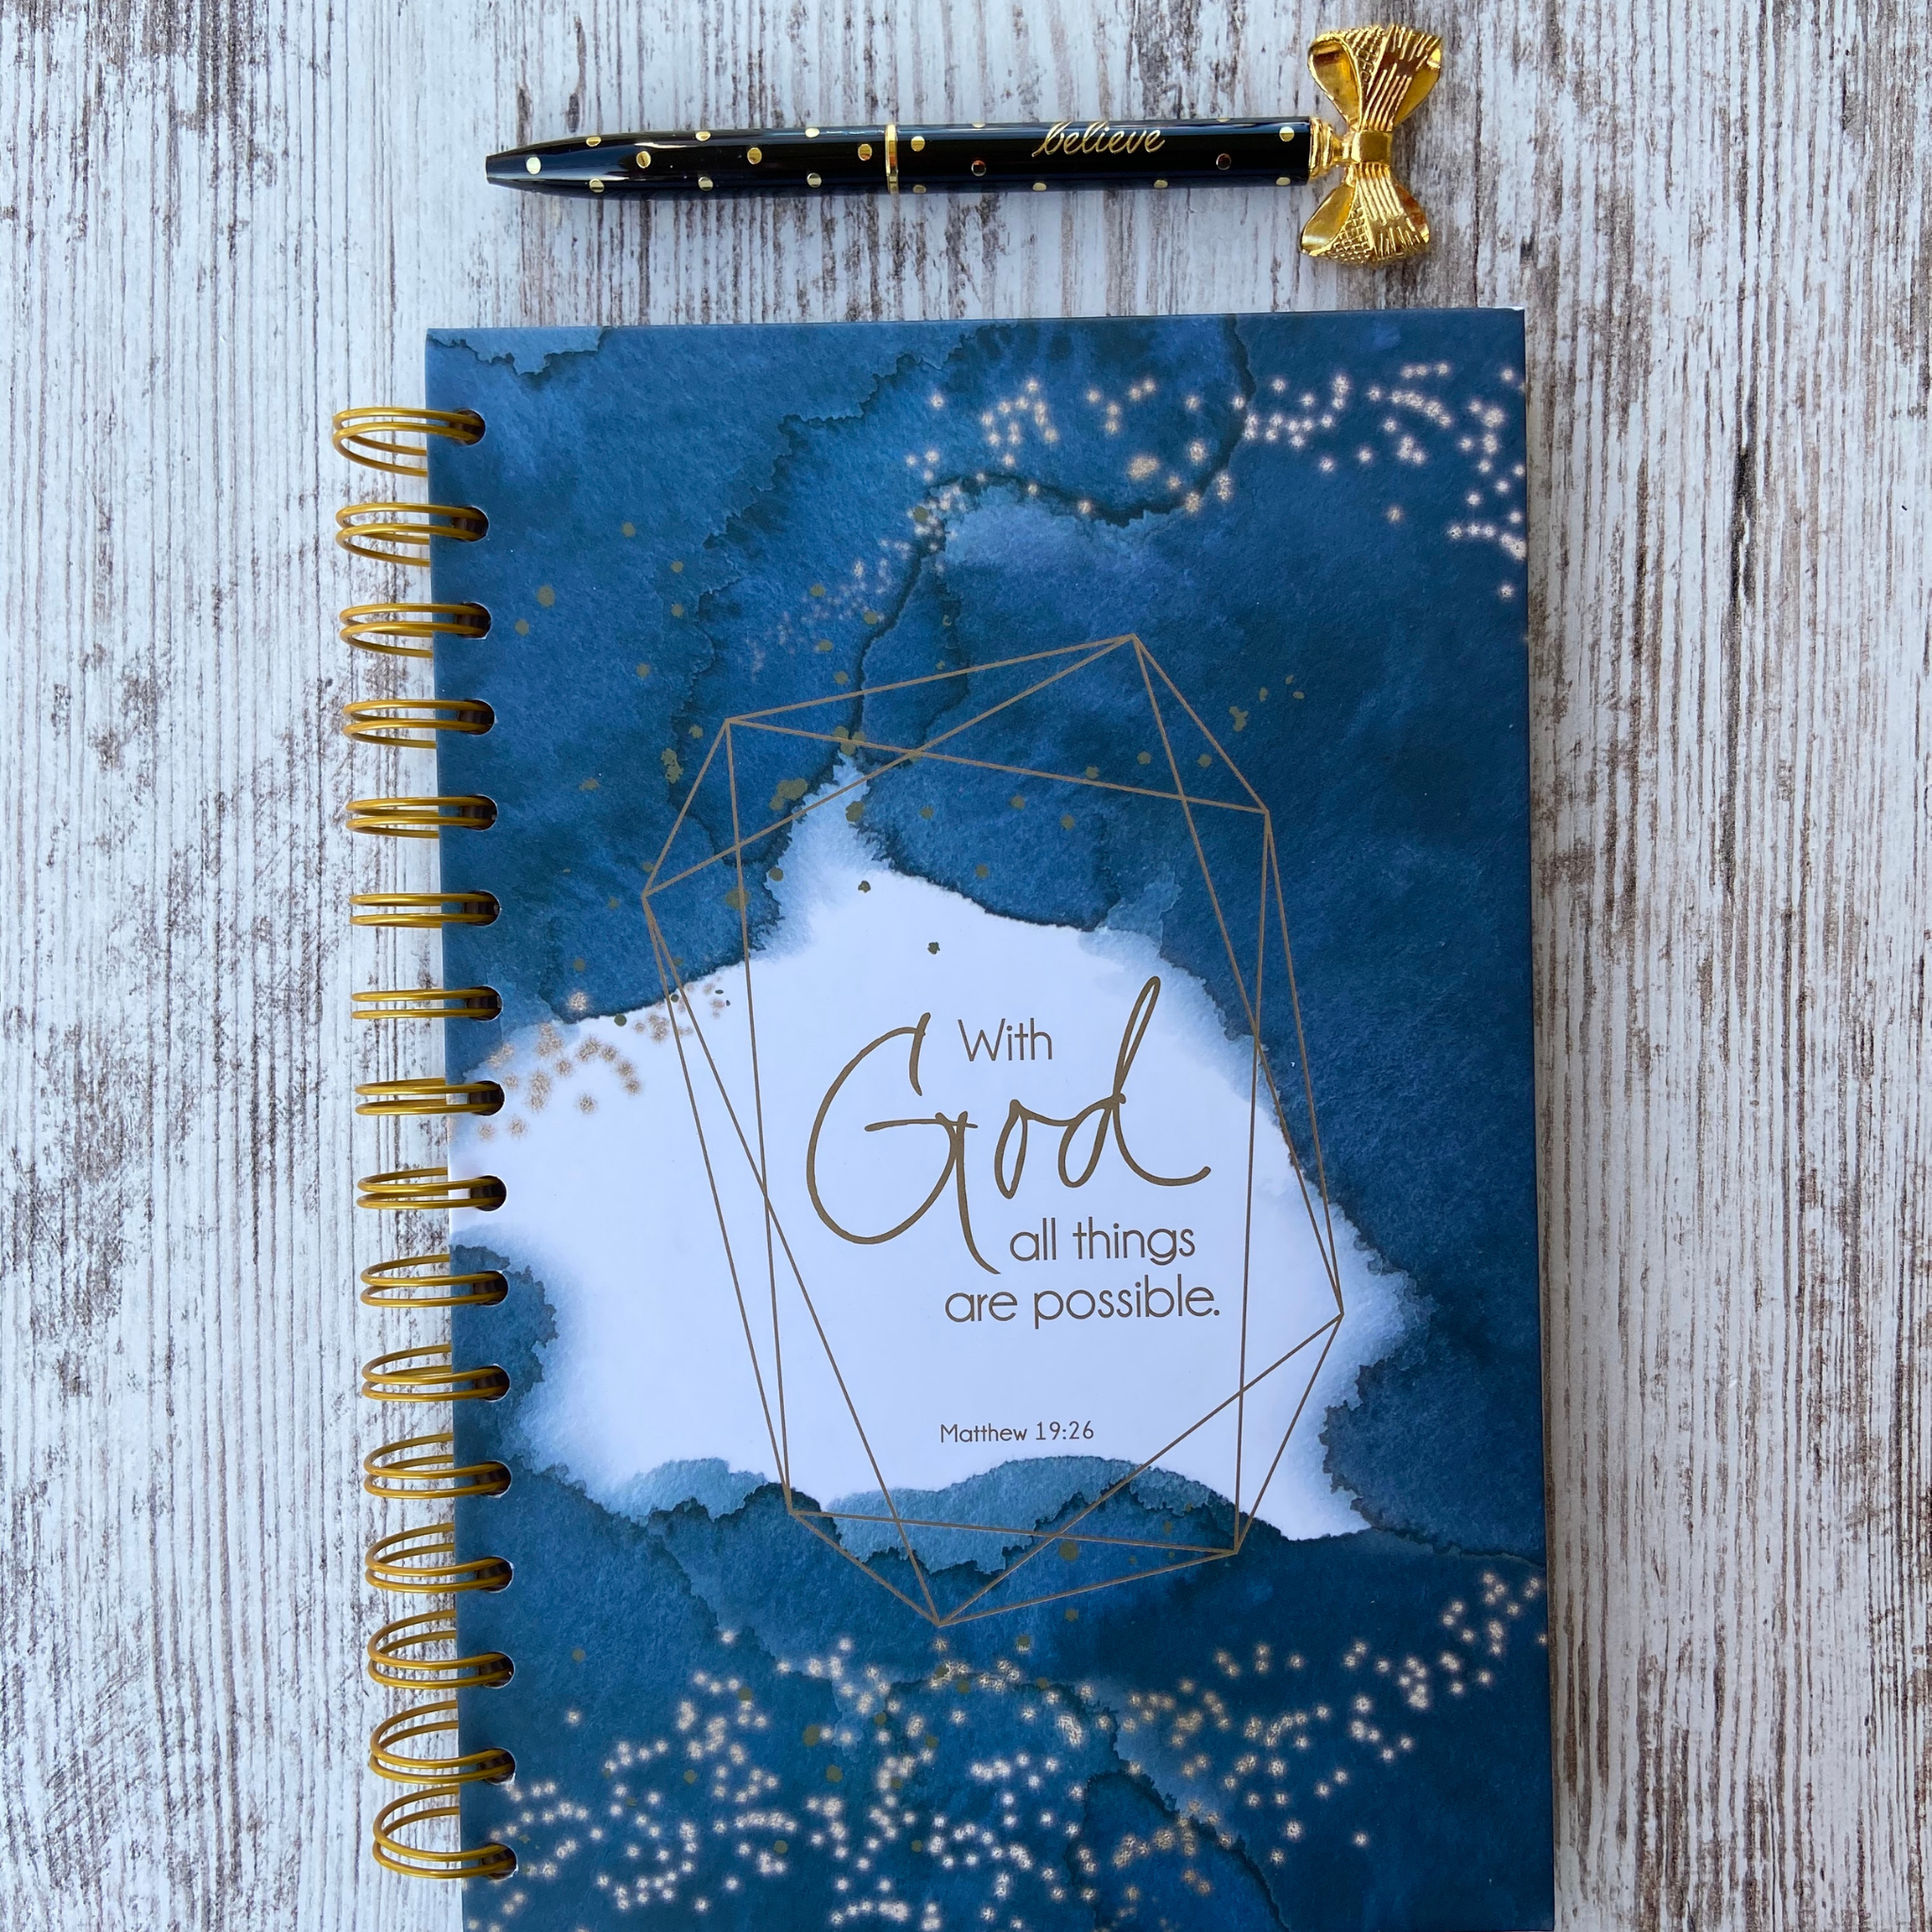 Grid Dot Journal "With God All Things are Possible" with Pen